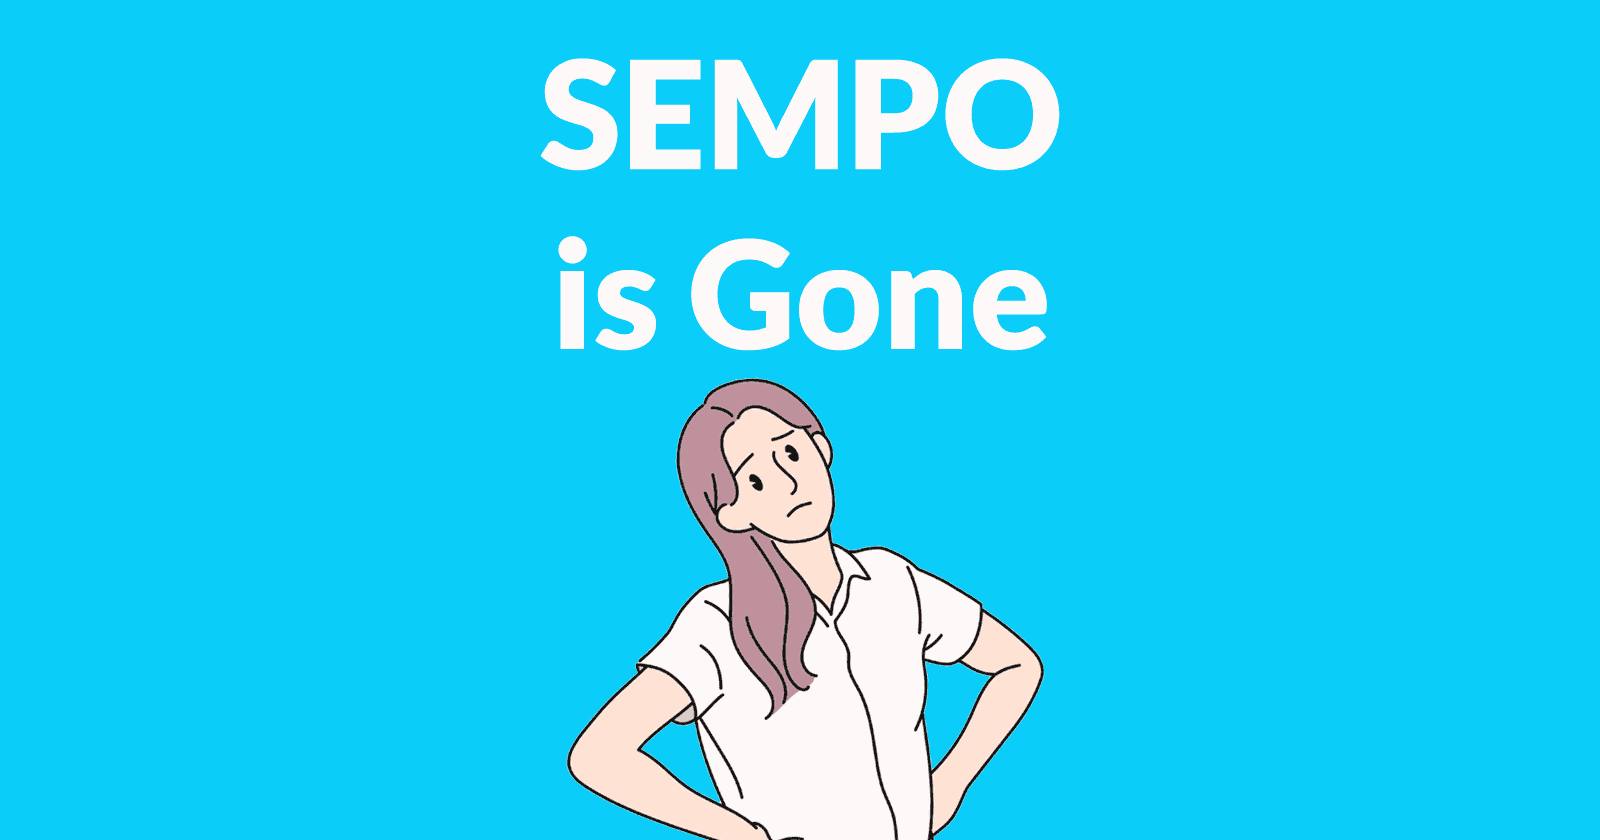 SEMPO is Gone